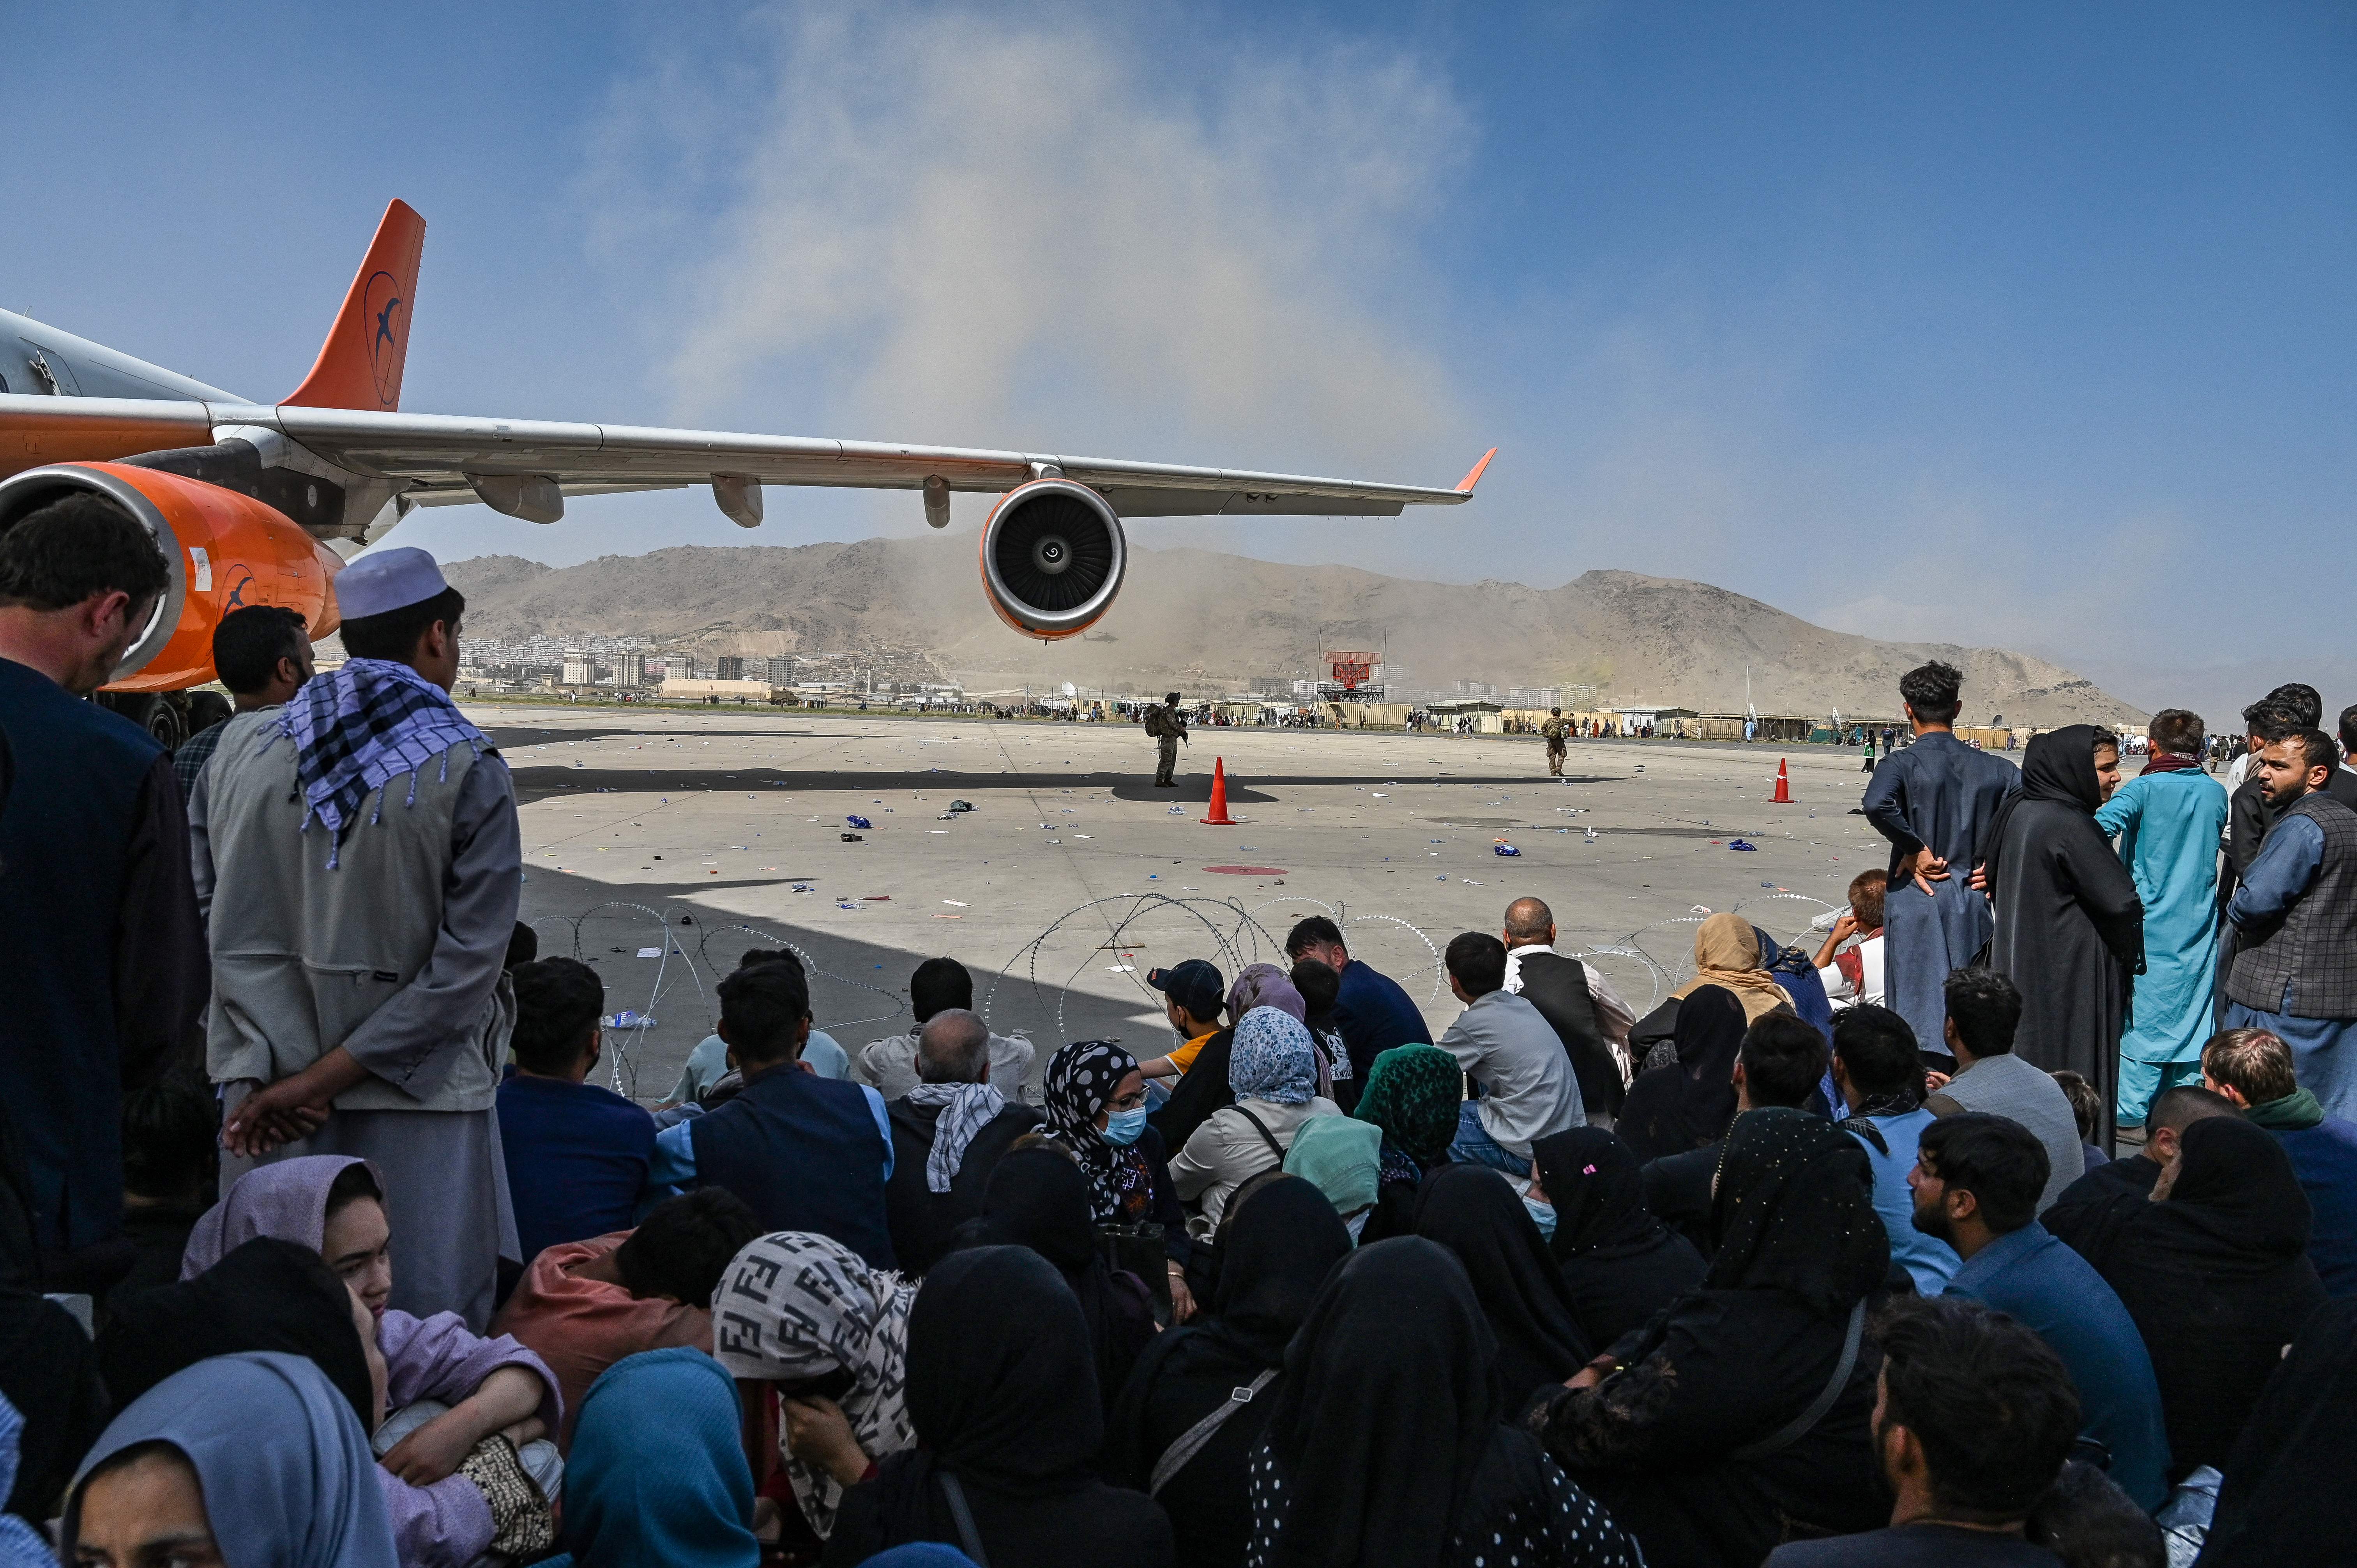 File photo: Thousands of people fled Afghanistan after the Taliban secured administrative and political power by force in August this year